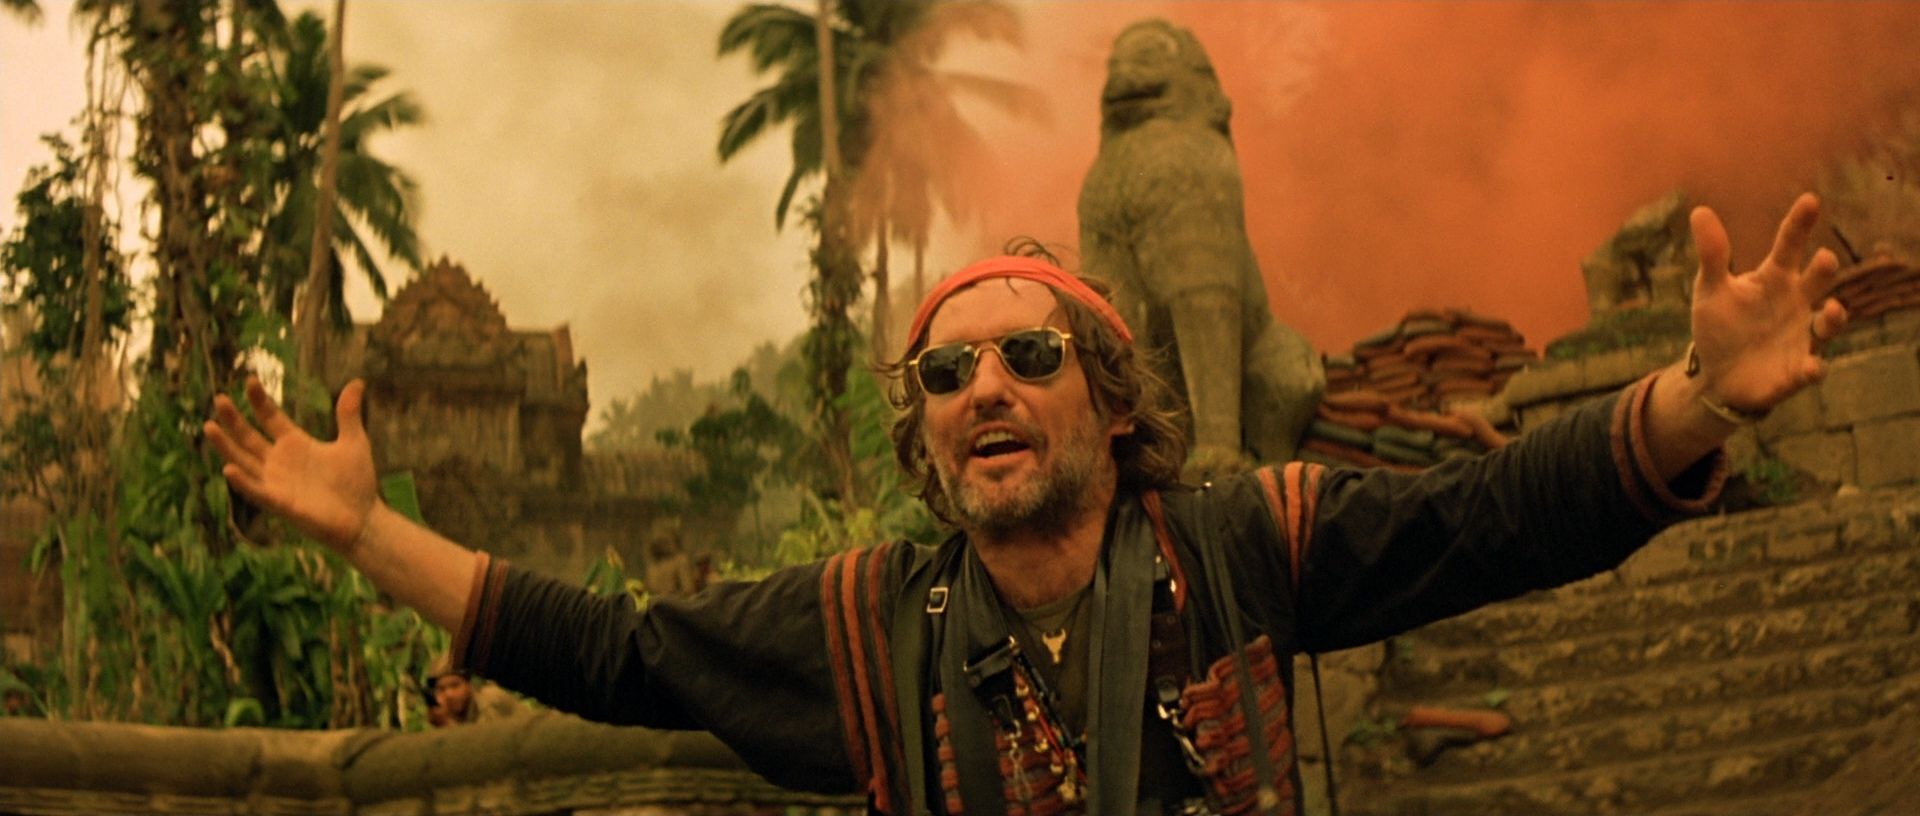 Apocalypse Now Movie HD Wallpaper | Movies Wallpapers